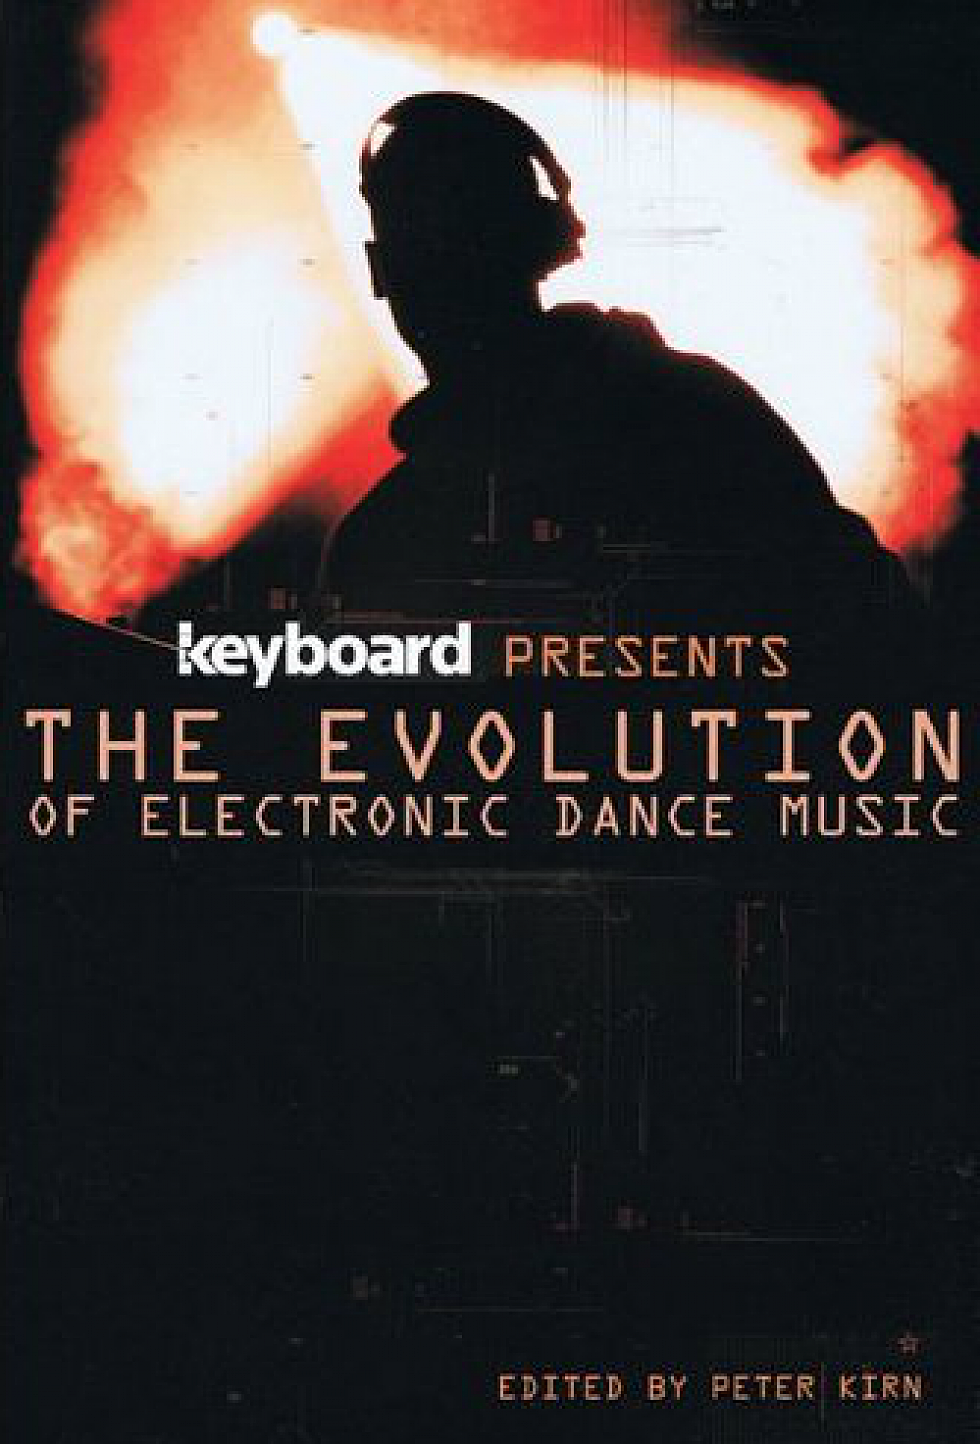 Chronicling the Evolution of Electronic Dance Music